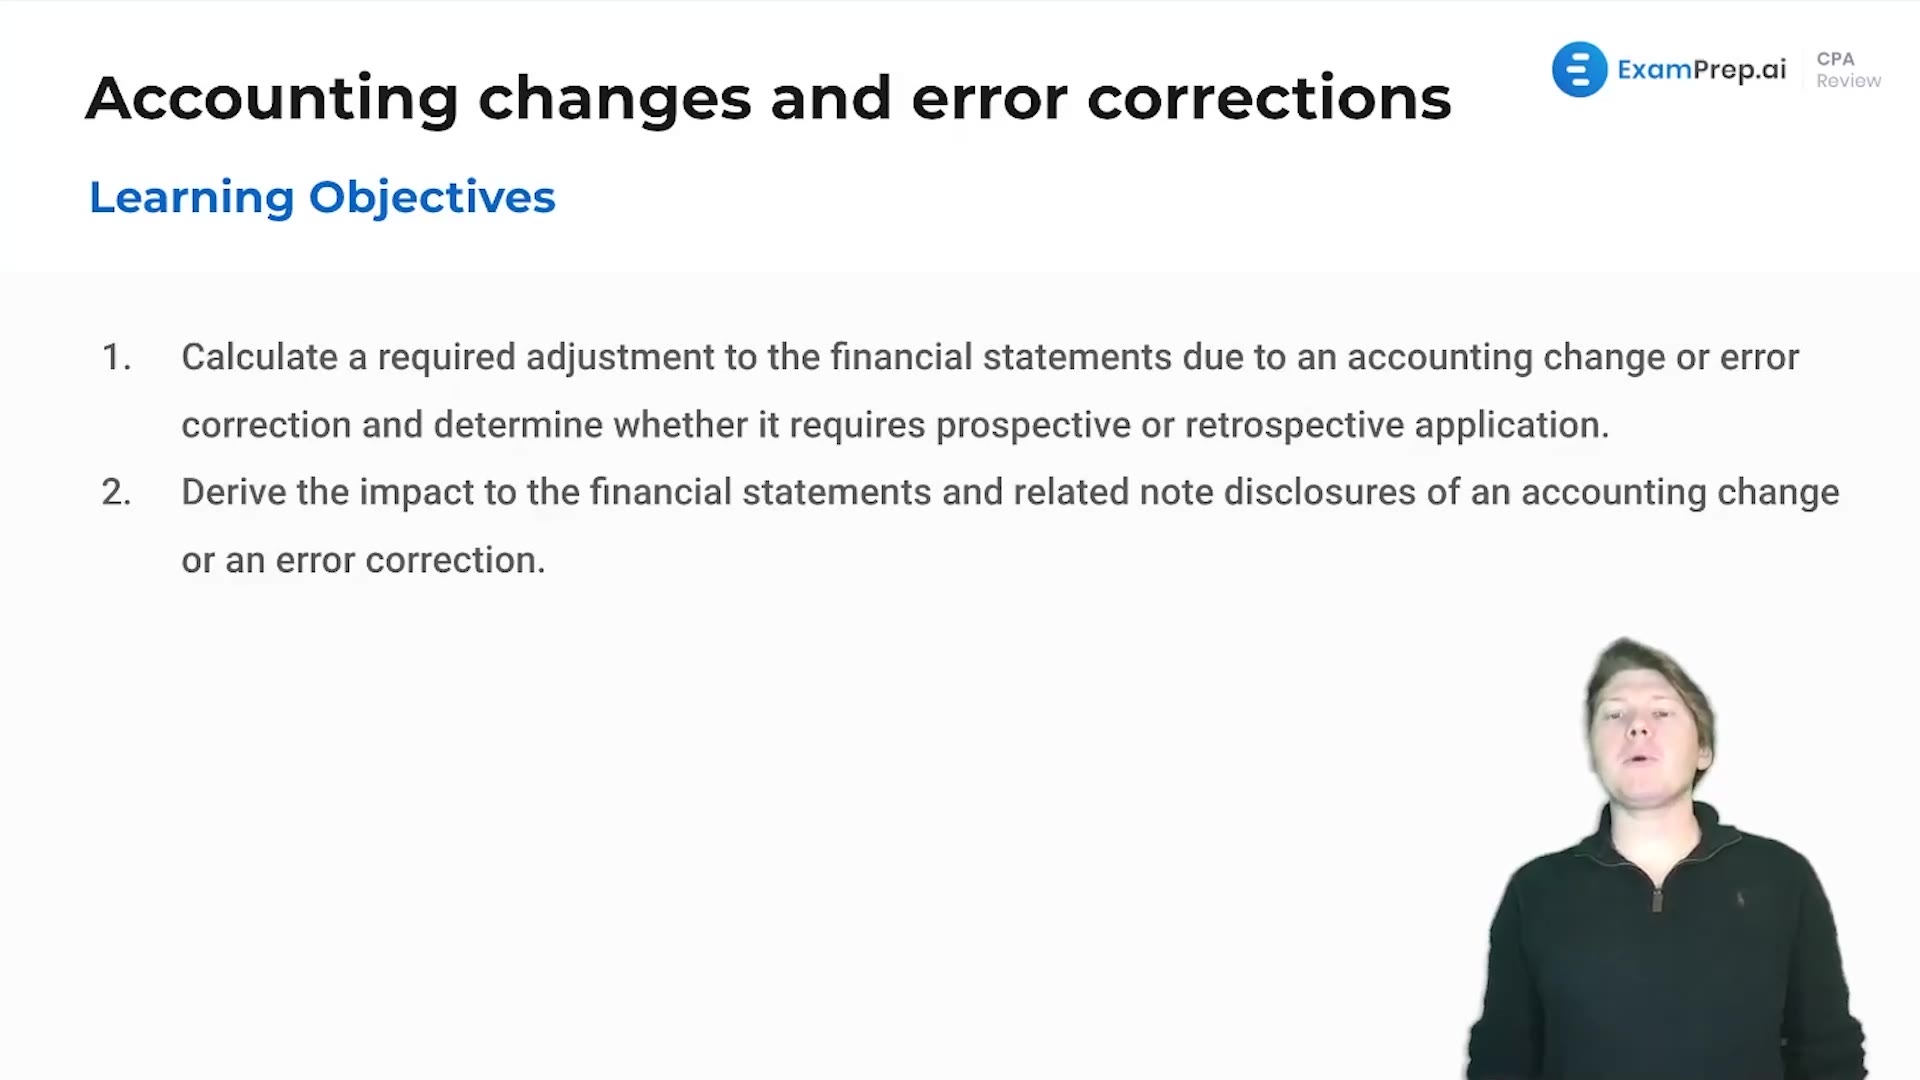 Accounting Changes and Error Corrections Overview and Objectives lesson thumbnail